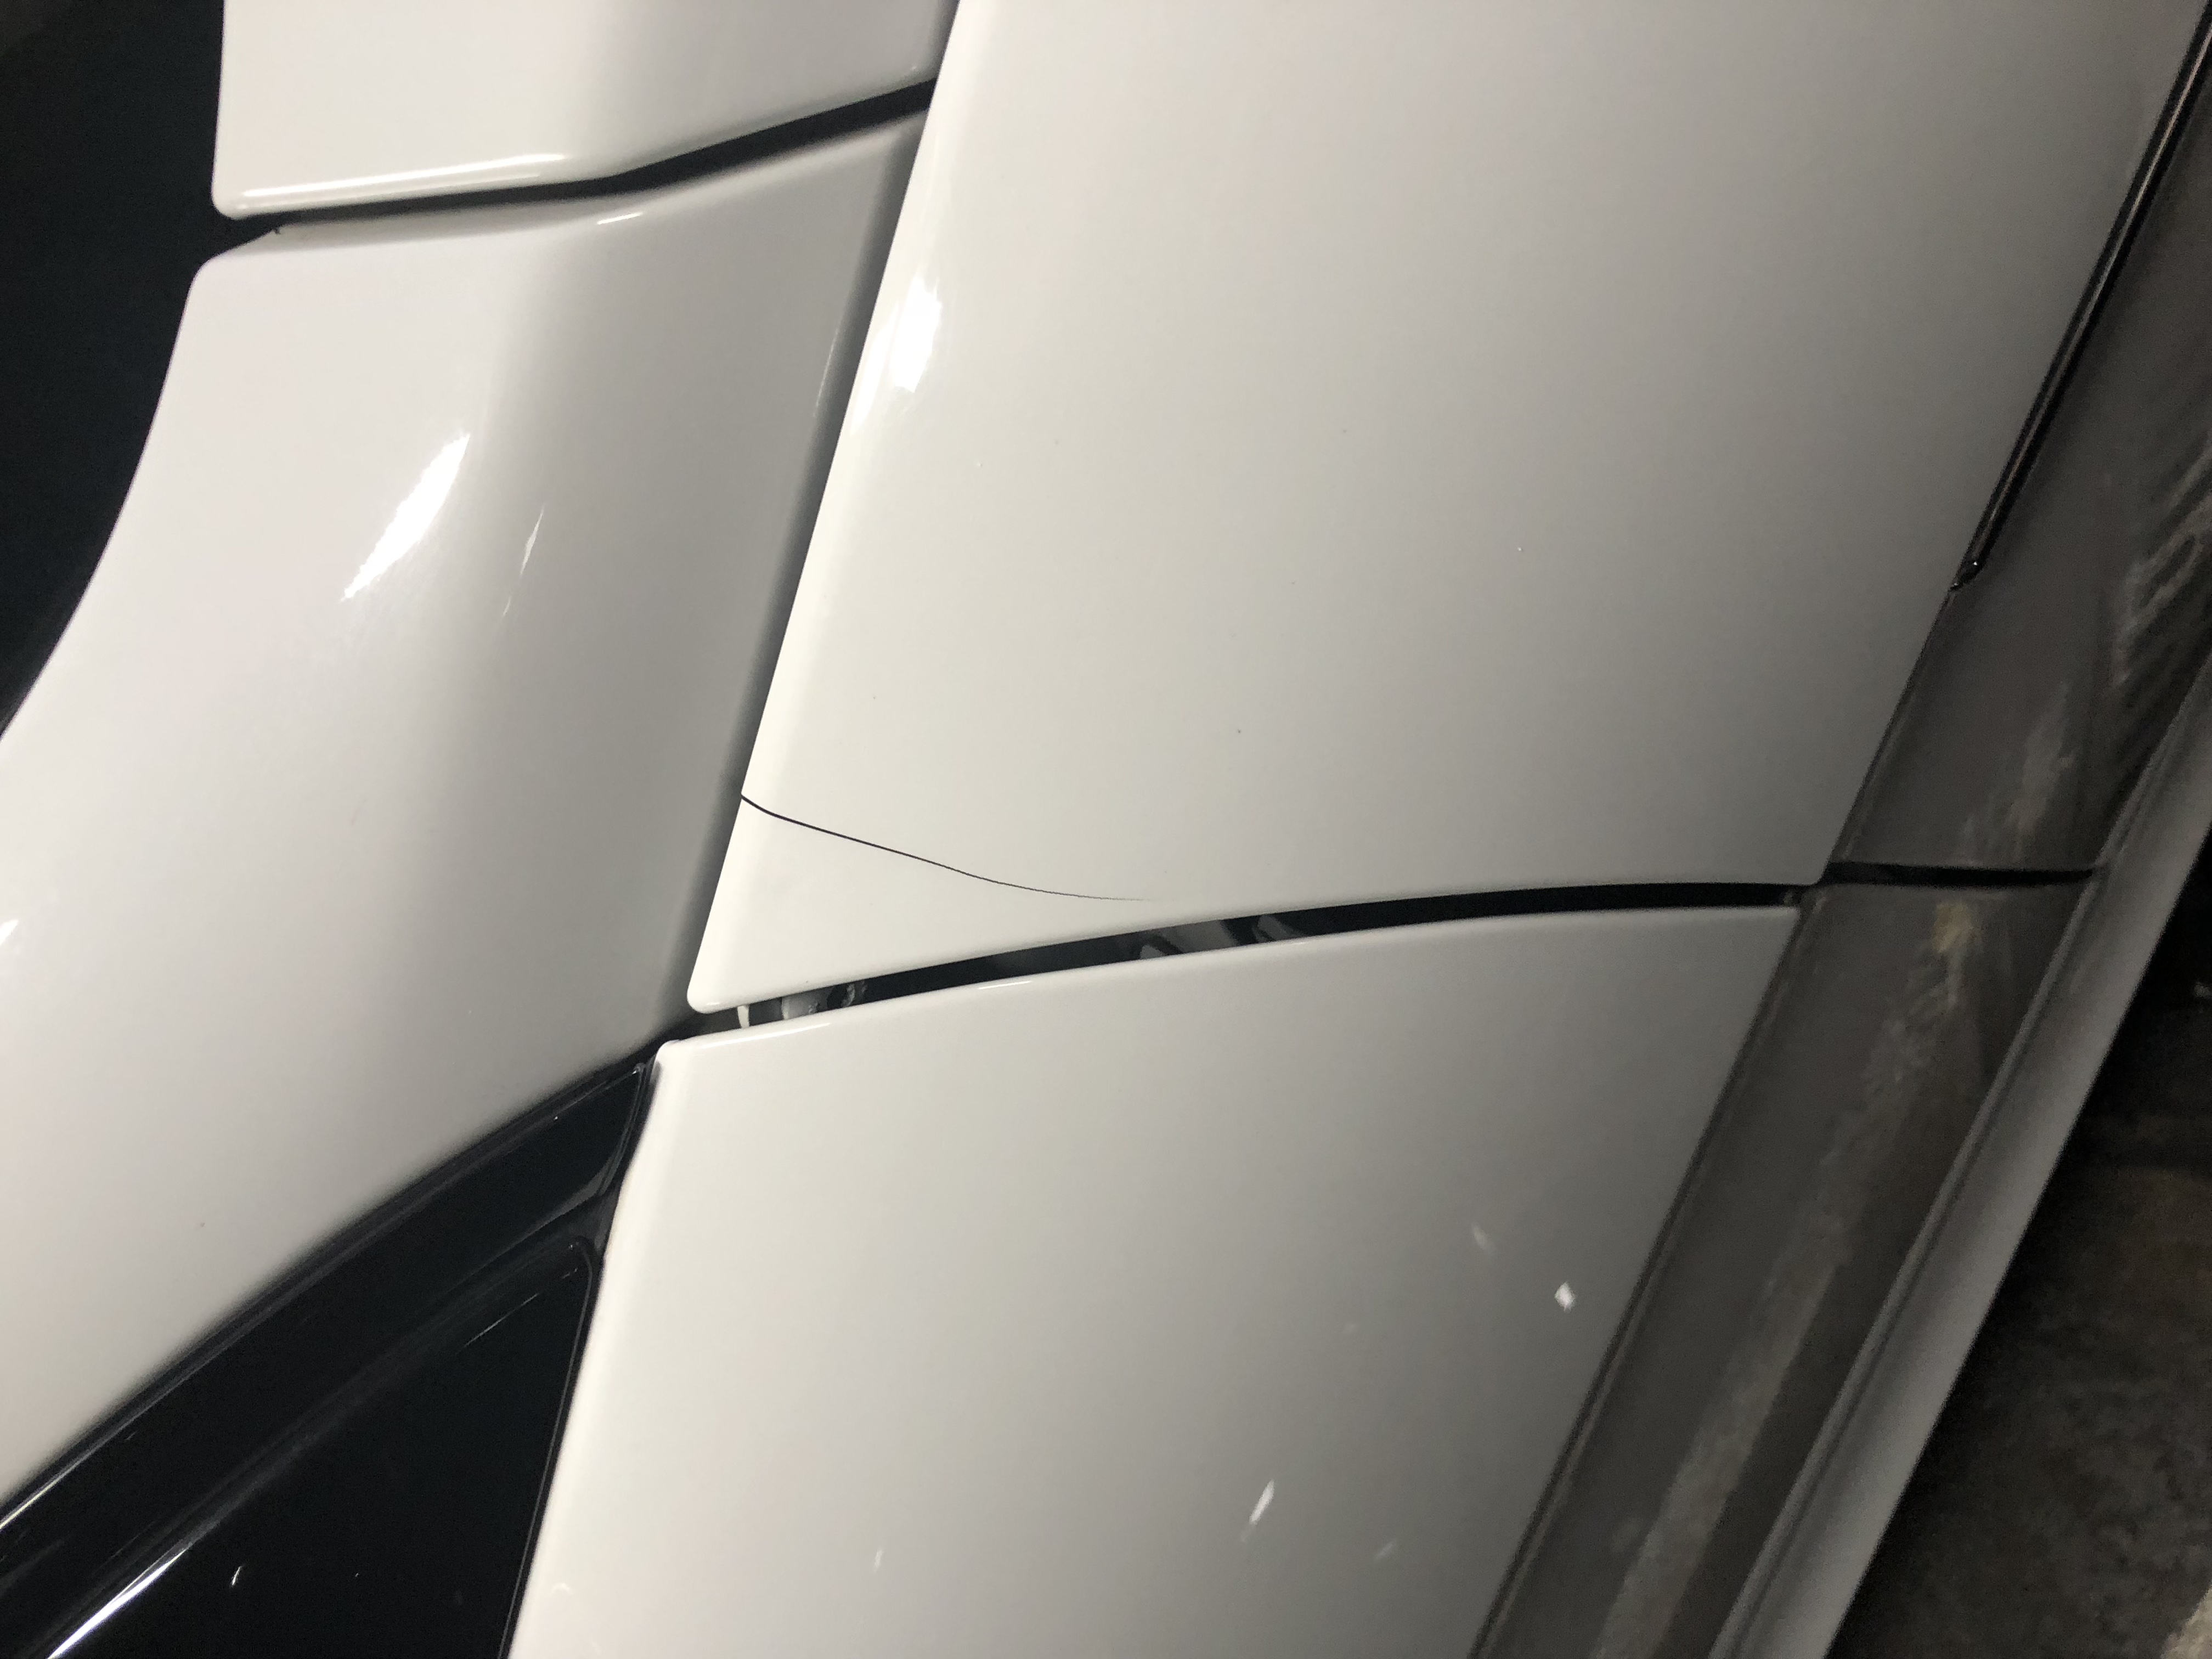 identical cracks  appeared on both sides of car 